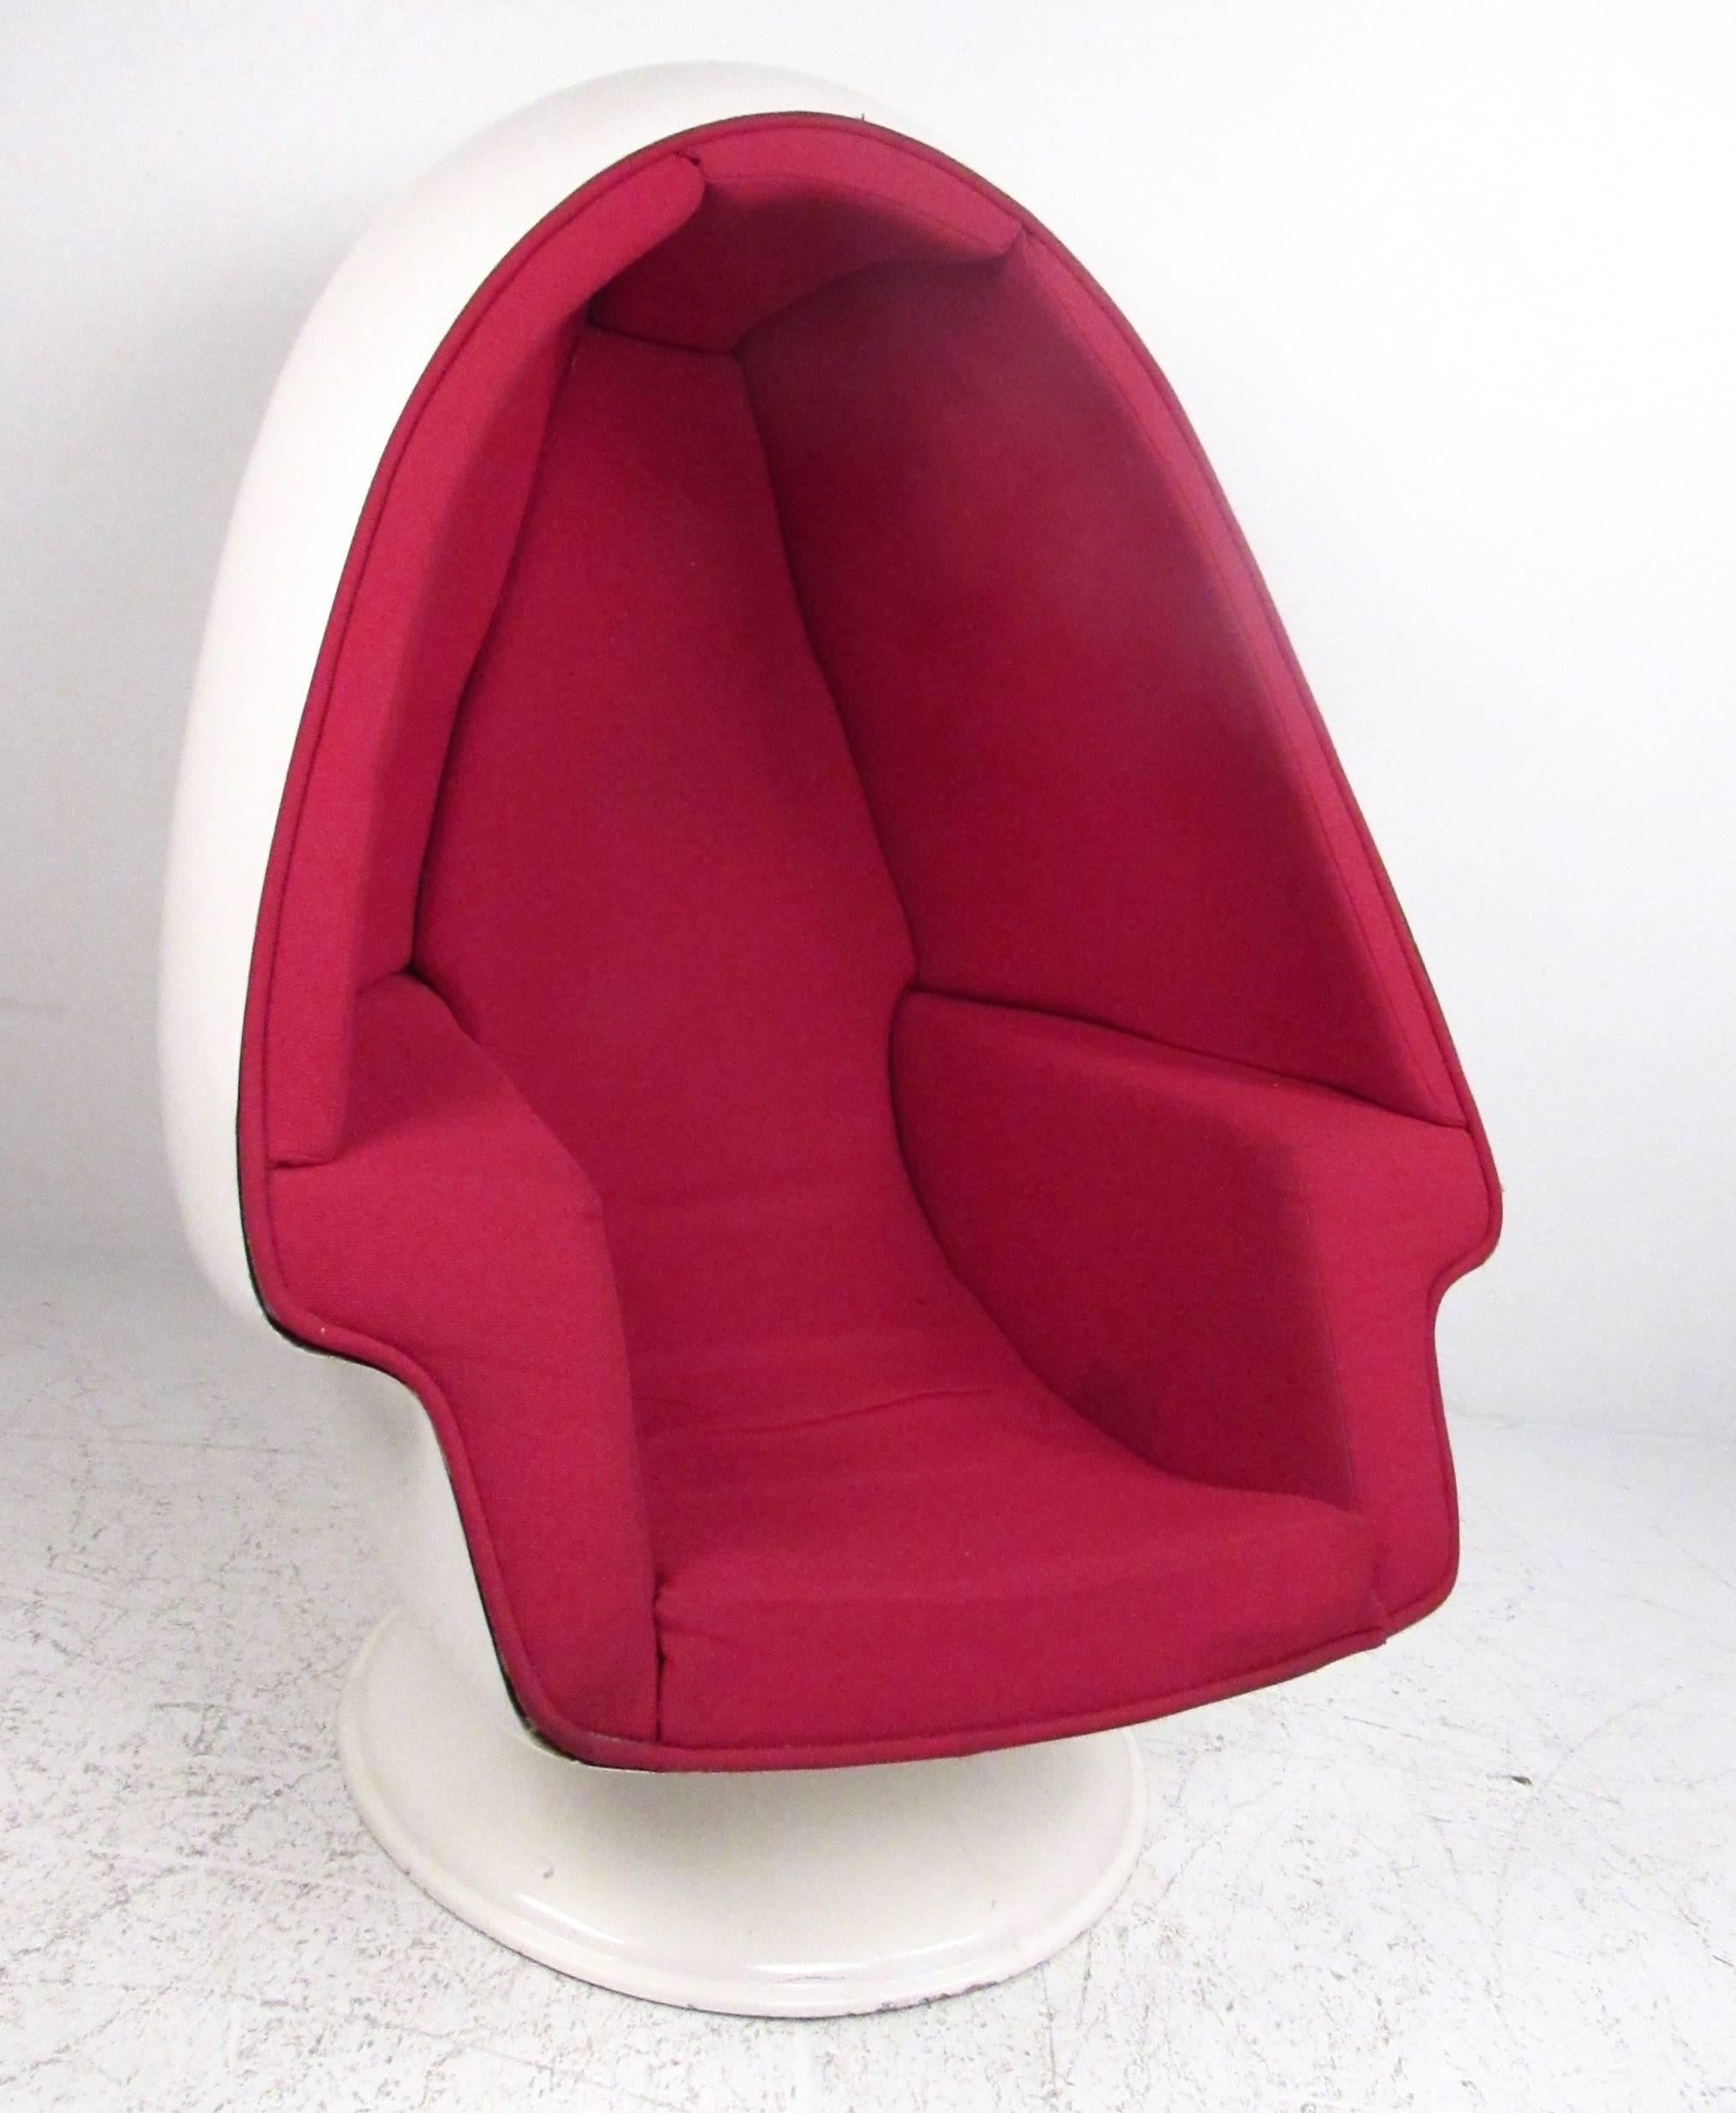 This vintage fiberglass Space Age style egg chair features comfortable molded upholstery creating a womb like interior ideal for listening to music. Original interior speakers allow the piece to be hooked up to home stereo system using connectors